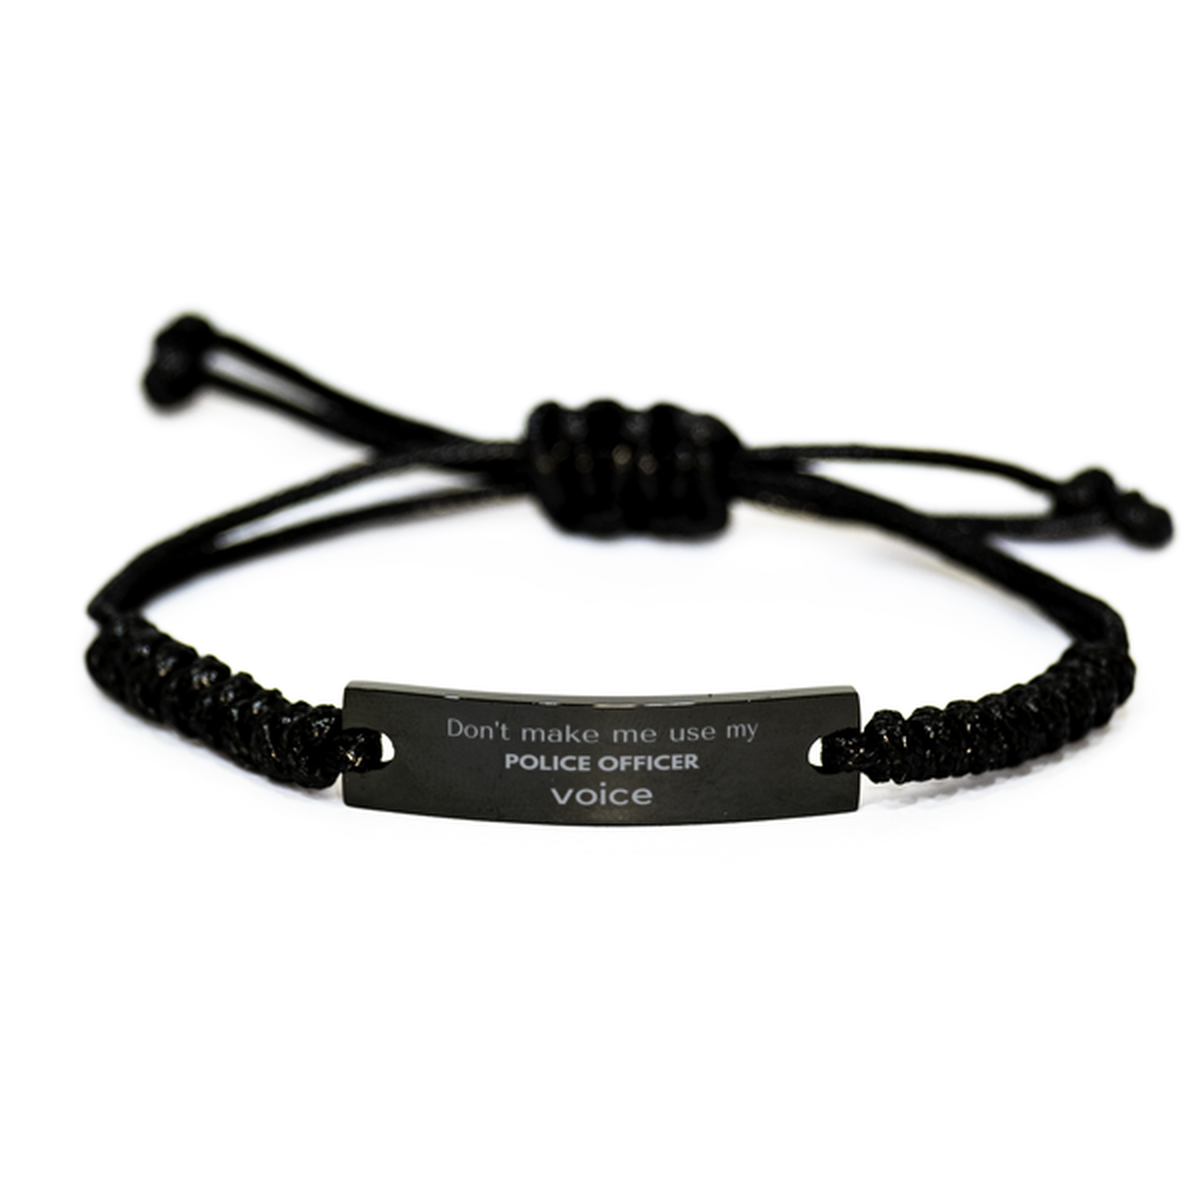 Don't make me use my Police Officer voice, Sarcasm Police Officer Gifts, Christmas Police Officer Black Rope Bracelet Birthday Unique Gifts For Police Officer Coworkers, Men, Women, Colleague, Friends